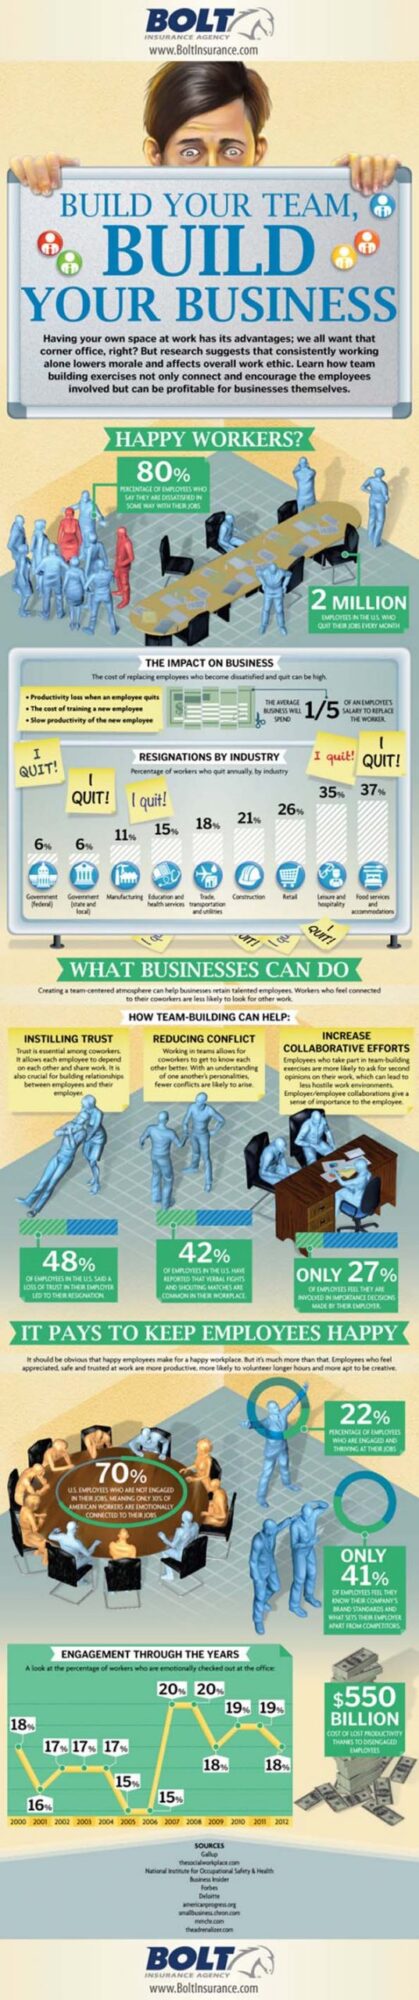 team building infographic from Bolt Insurance